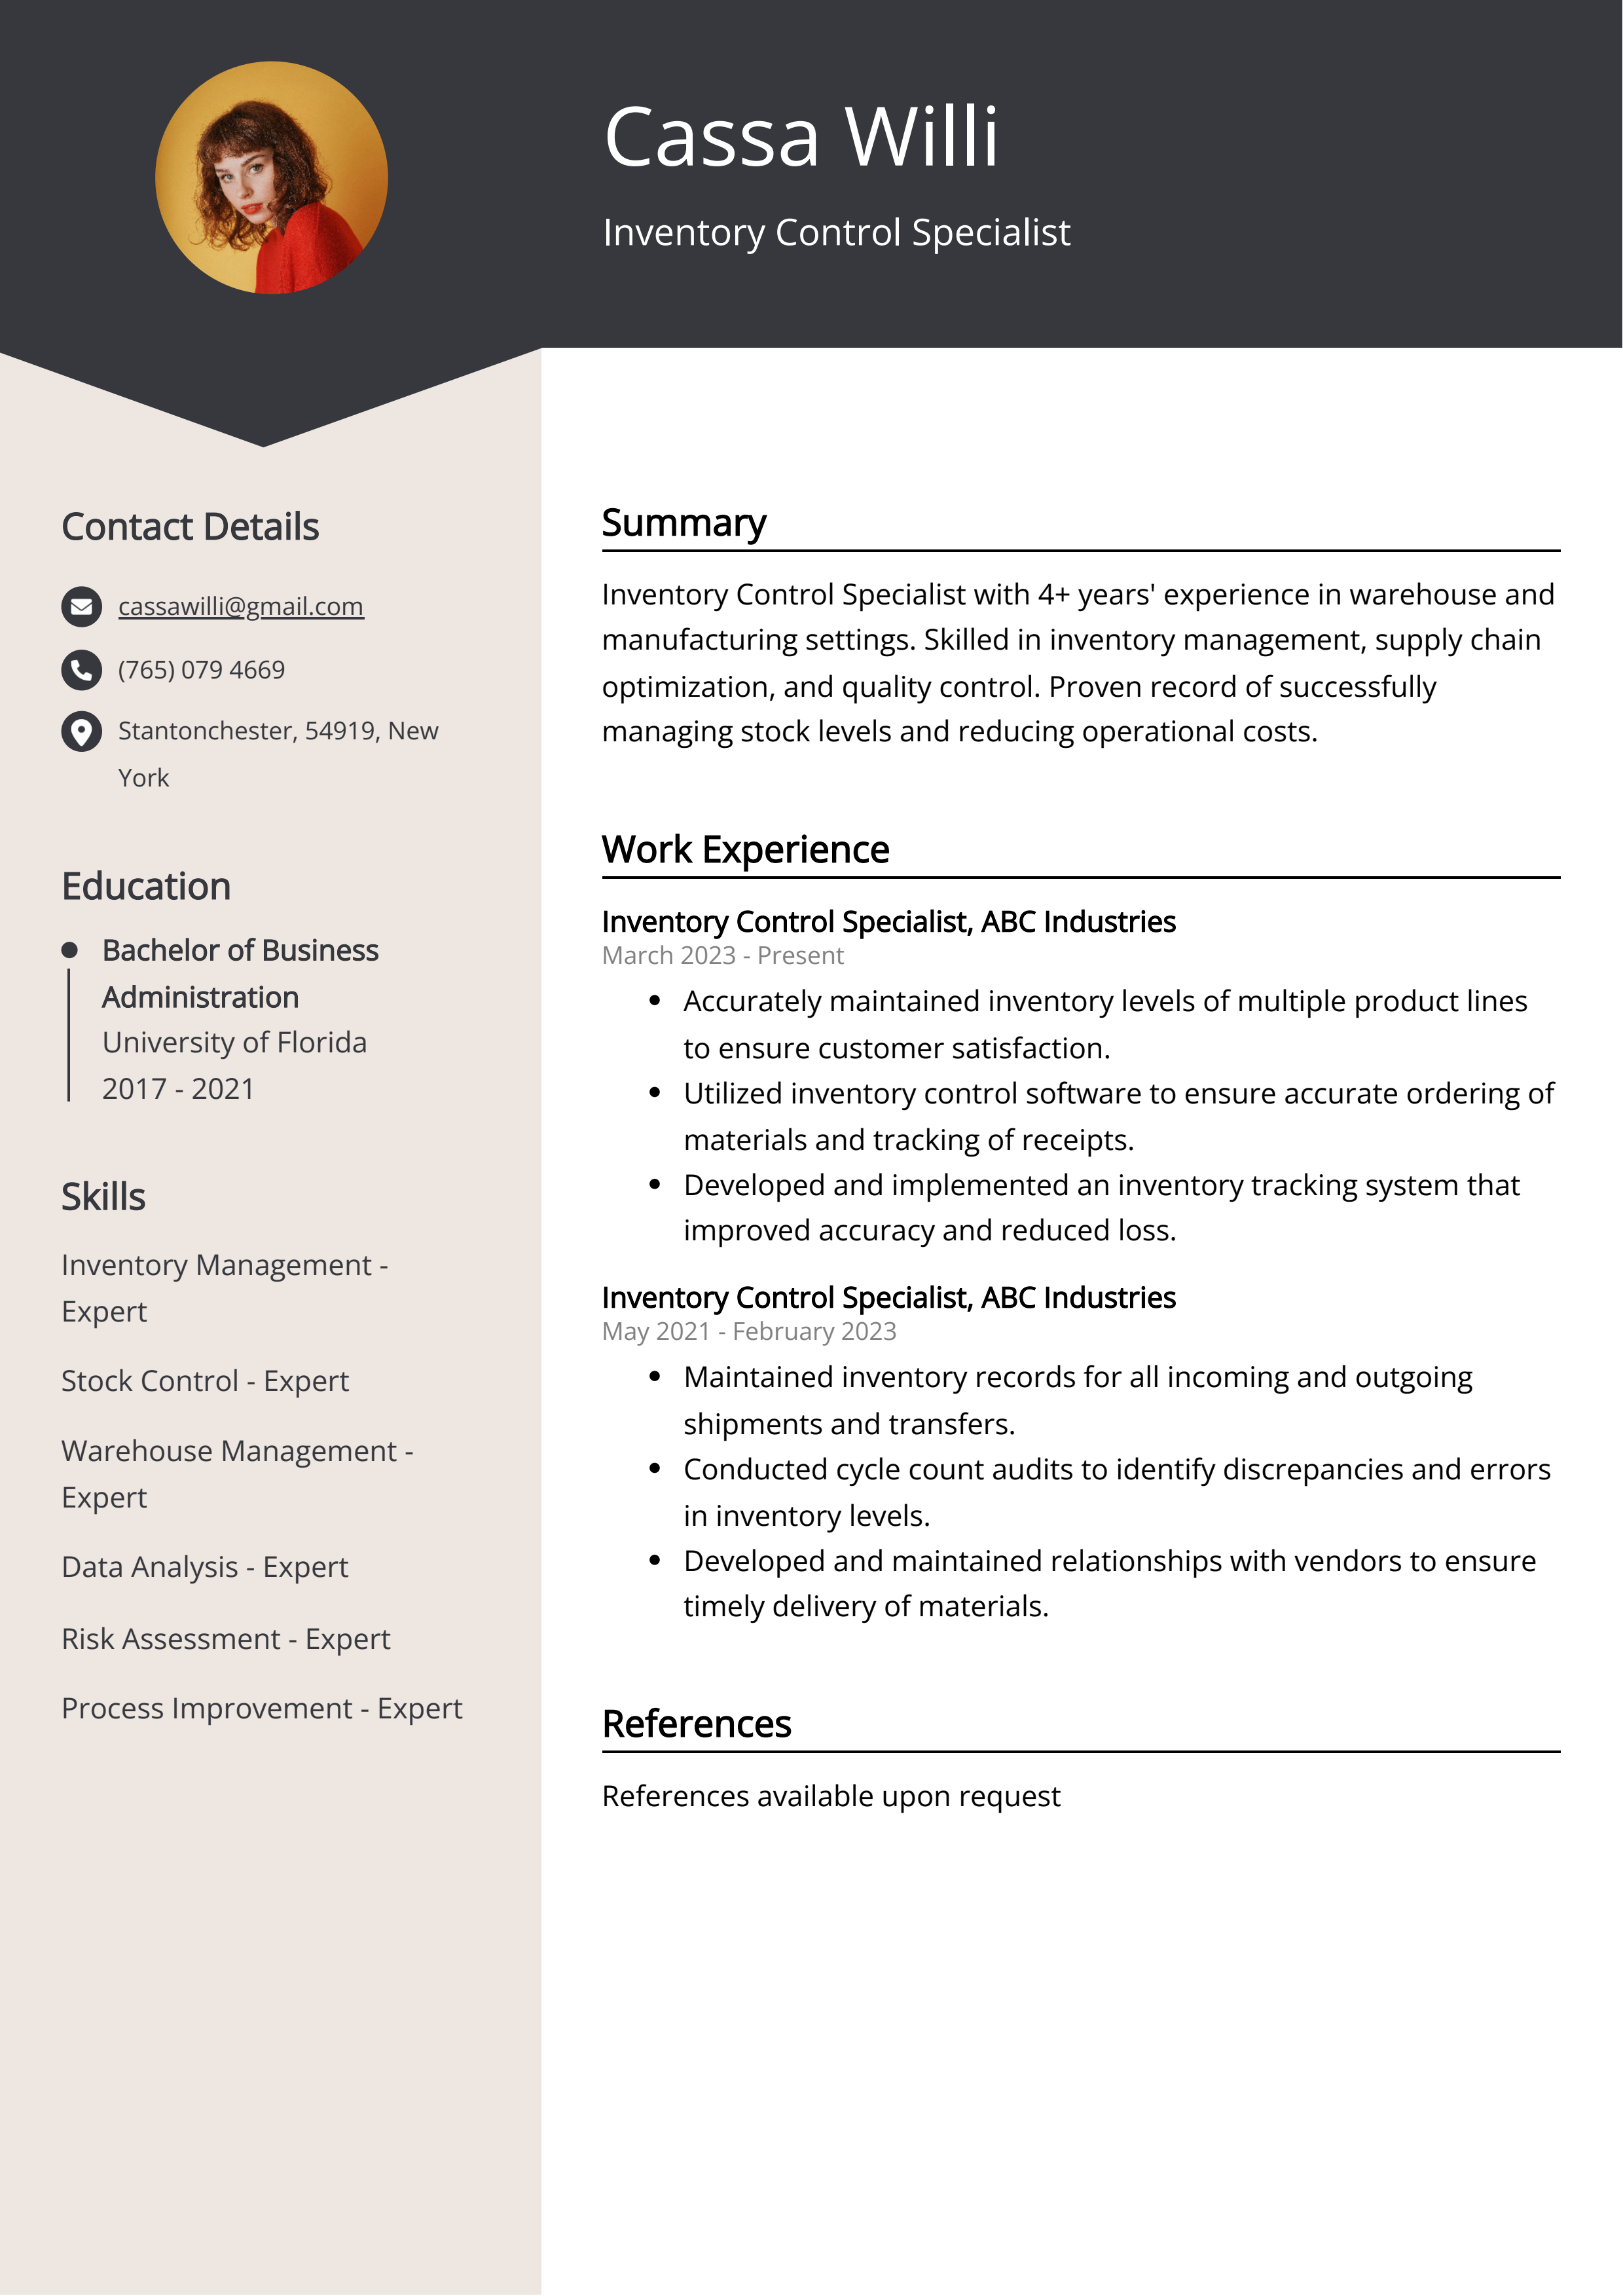 Inventory Control Specialist Resume Example